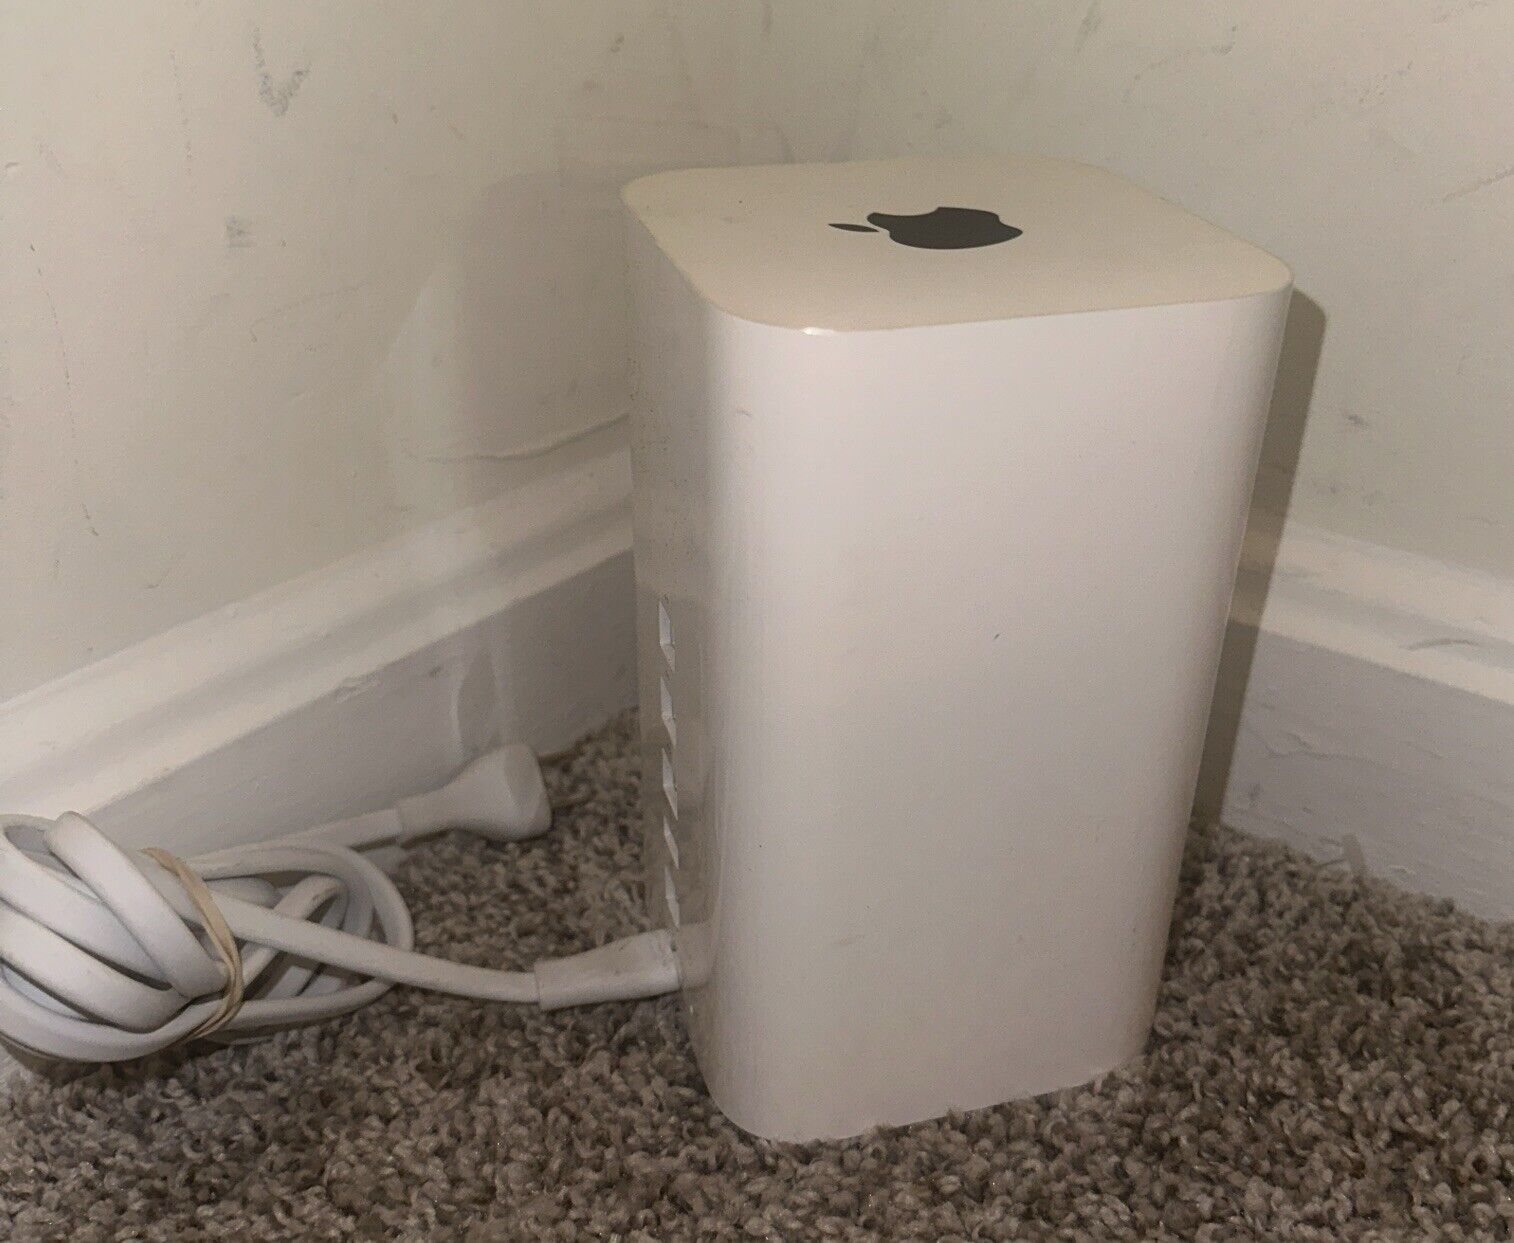 Apple Airport Extreme A1521 (Tested, Works)